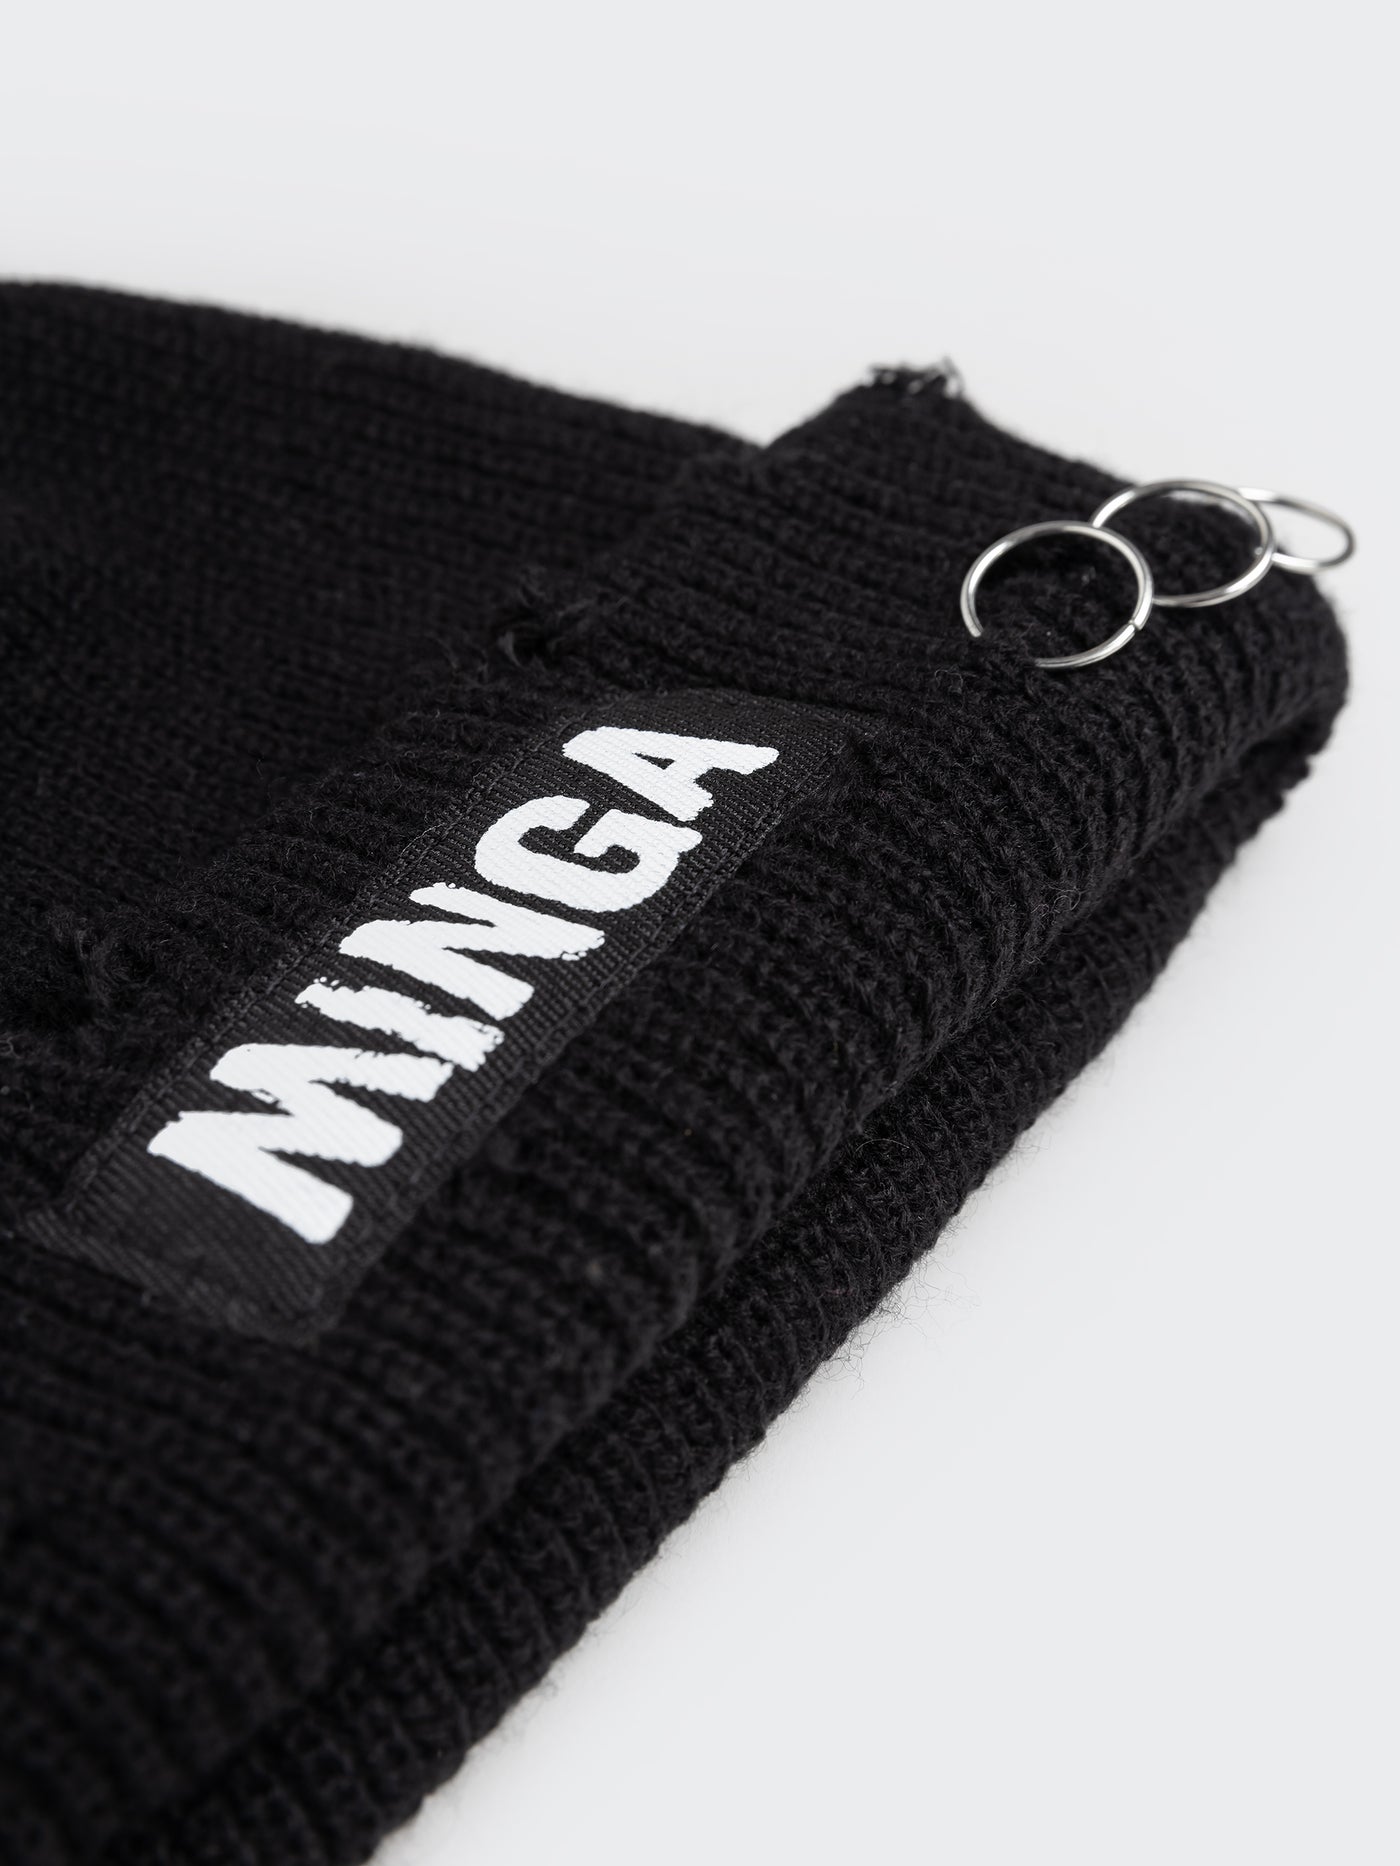 A stylish and edgy black beanie with distressed details for a rugged and trendy look.